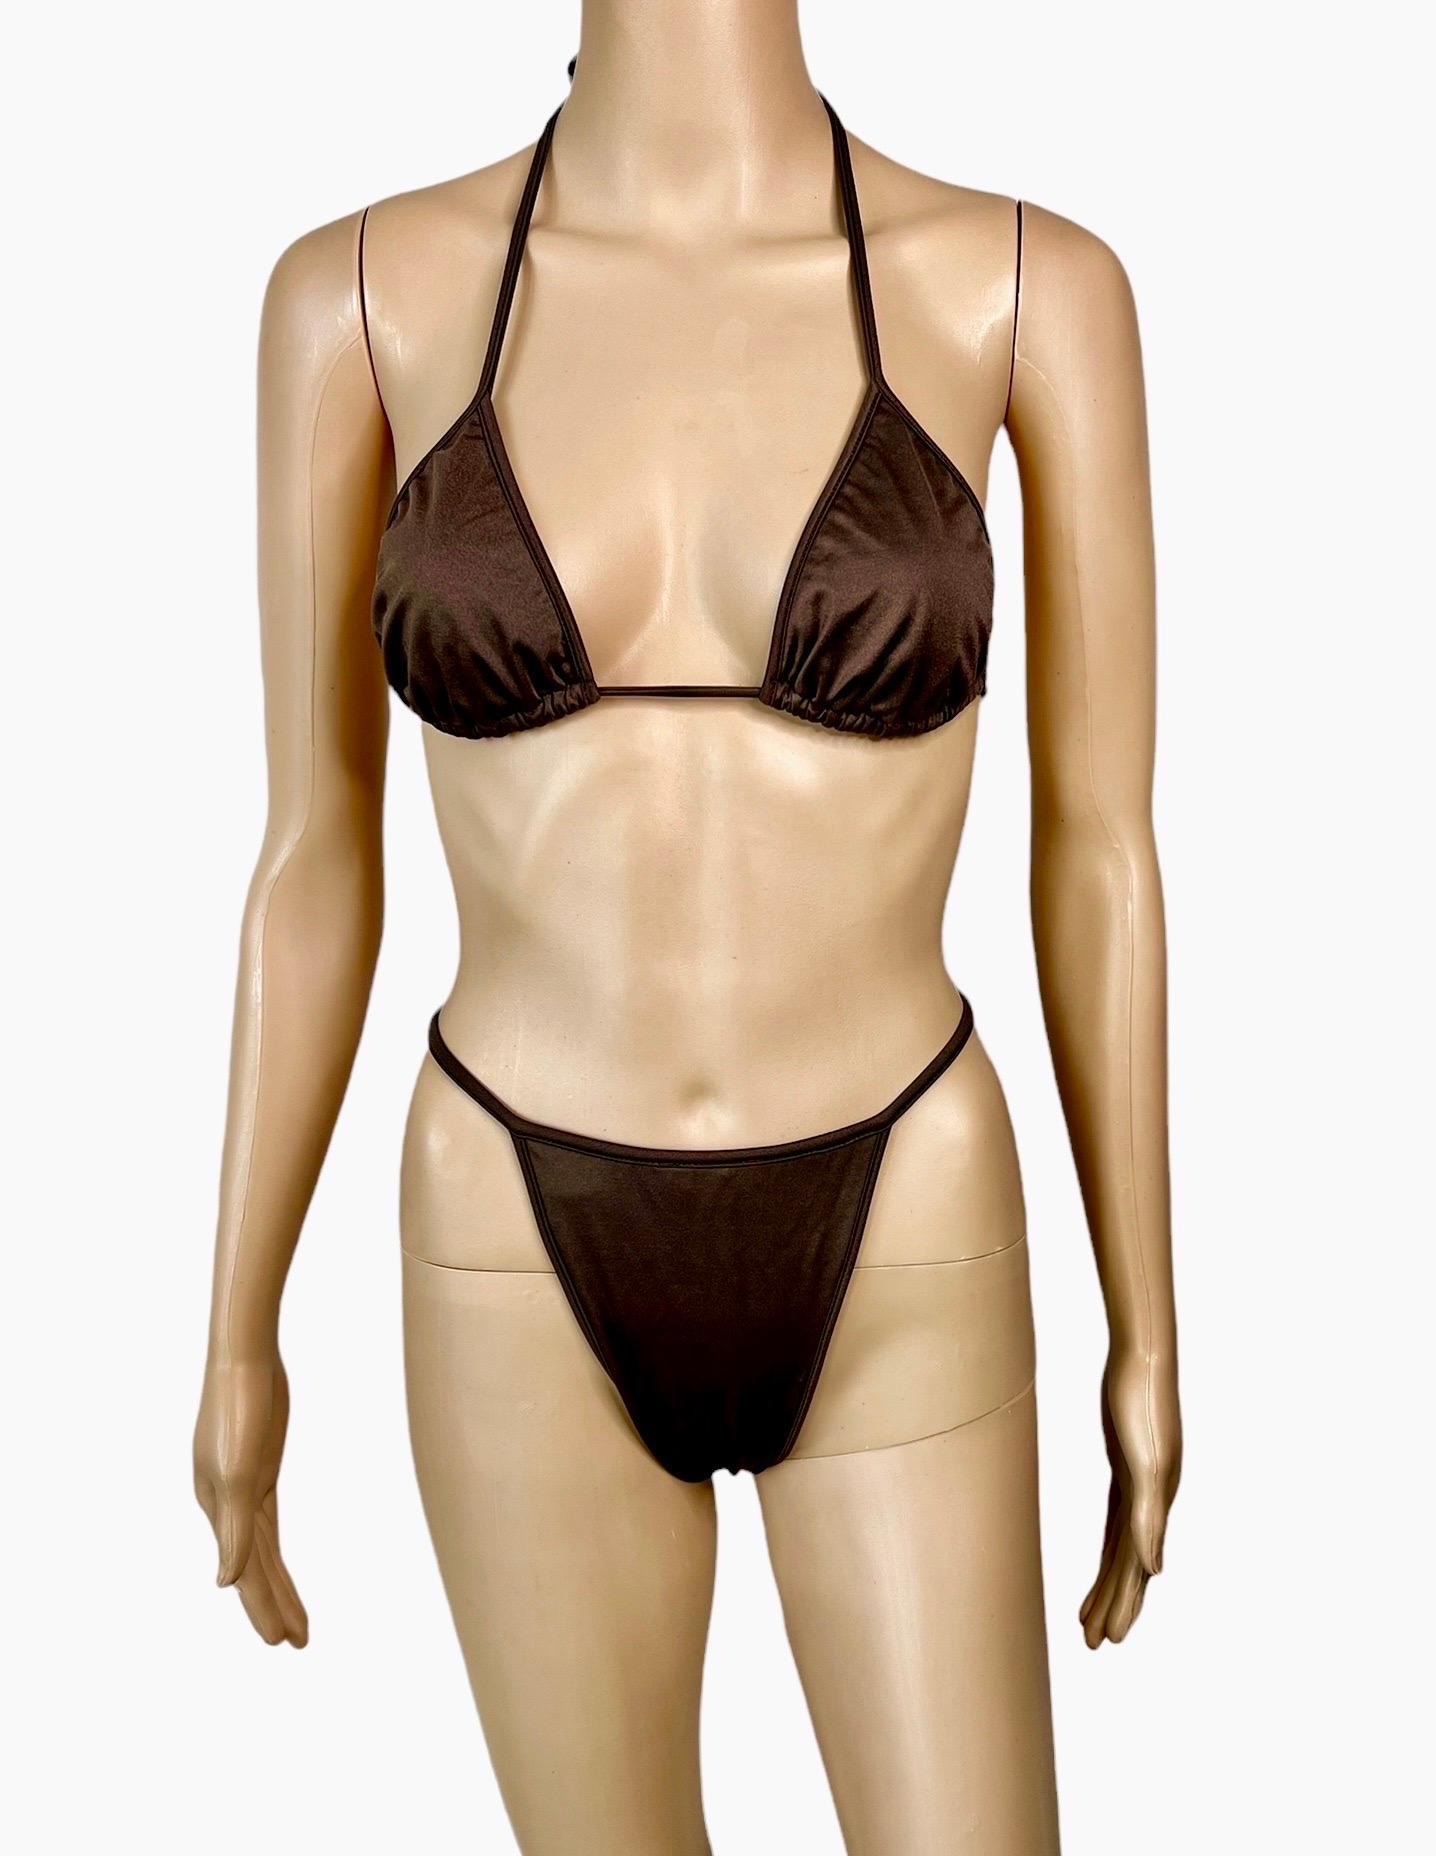 Tom Ford for Gucci S/S 1997 Runway GG Logo Thong Bra & Bikini Two-Piece Swimwear In Excellent Condition For Sale In Naples, FL